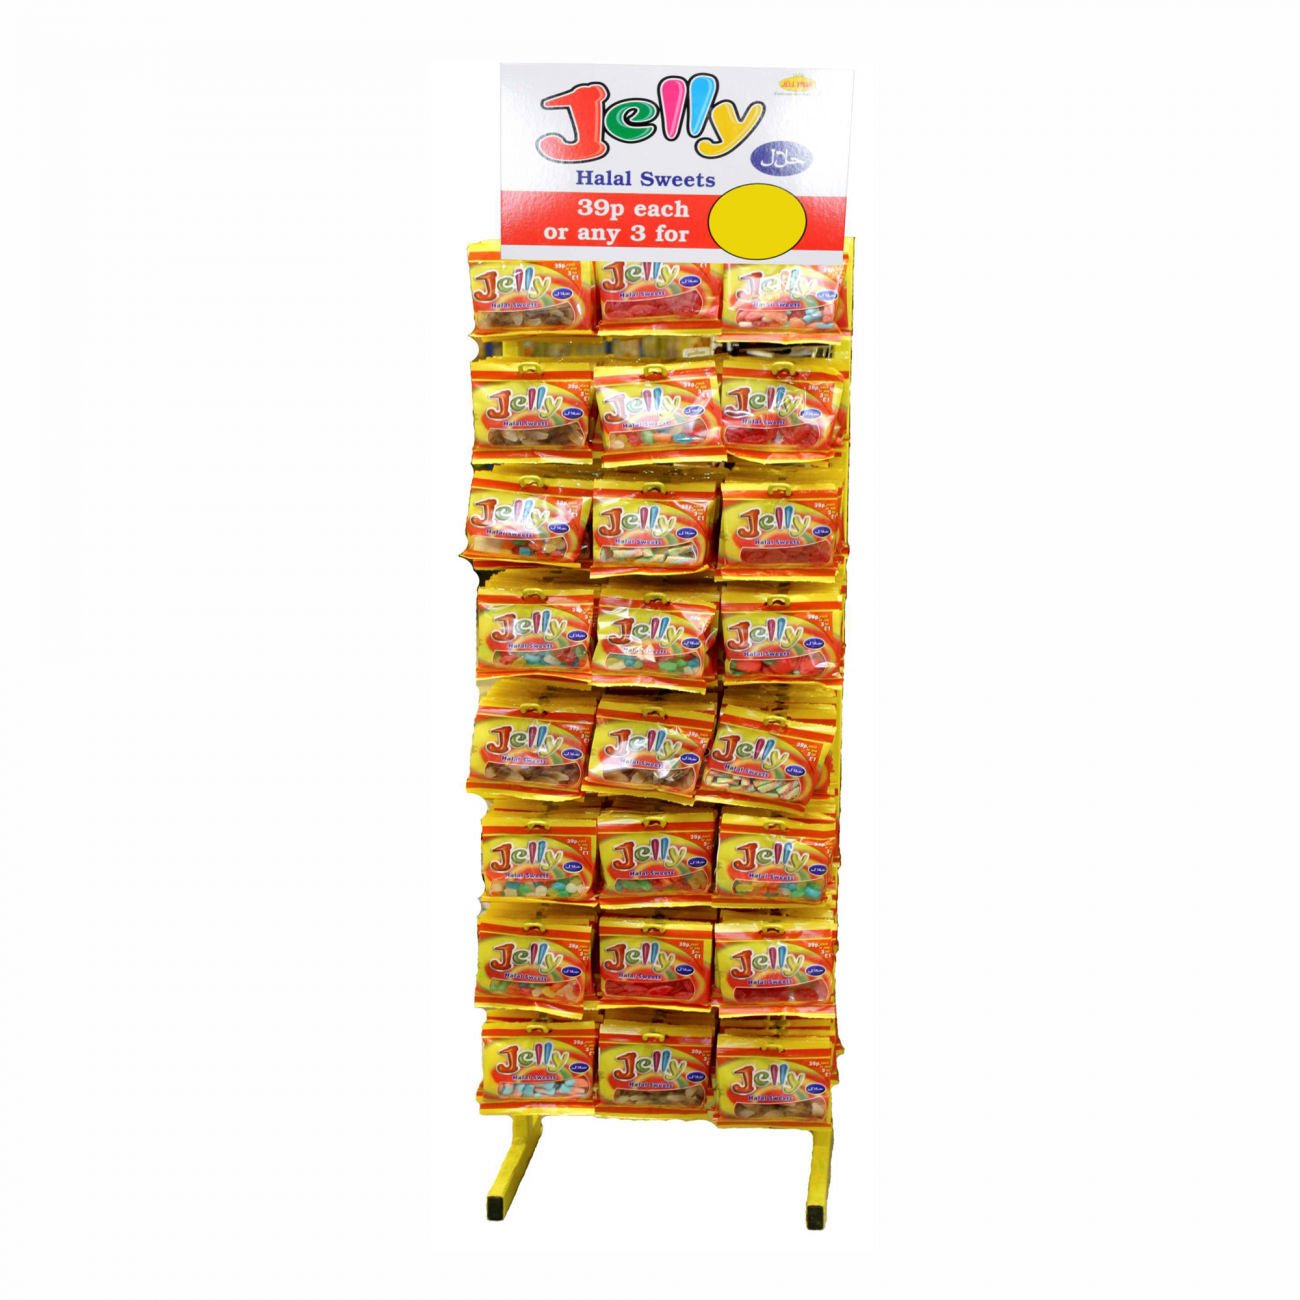 Jelly Halal Sweet Fizzy 3 For 1 (45G) - Aytac Foods